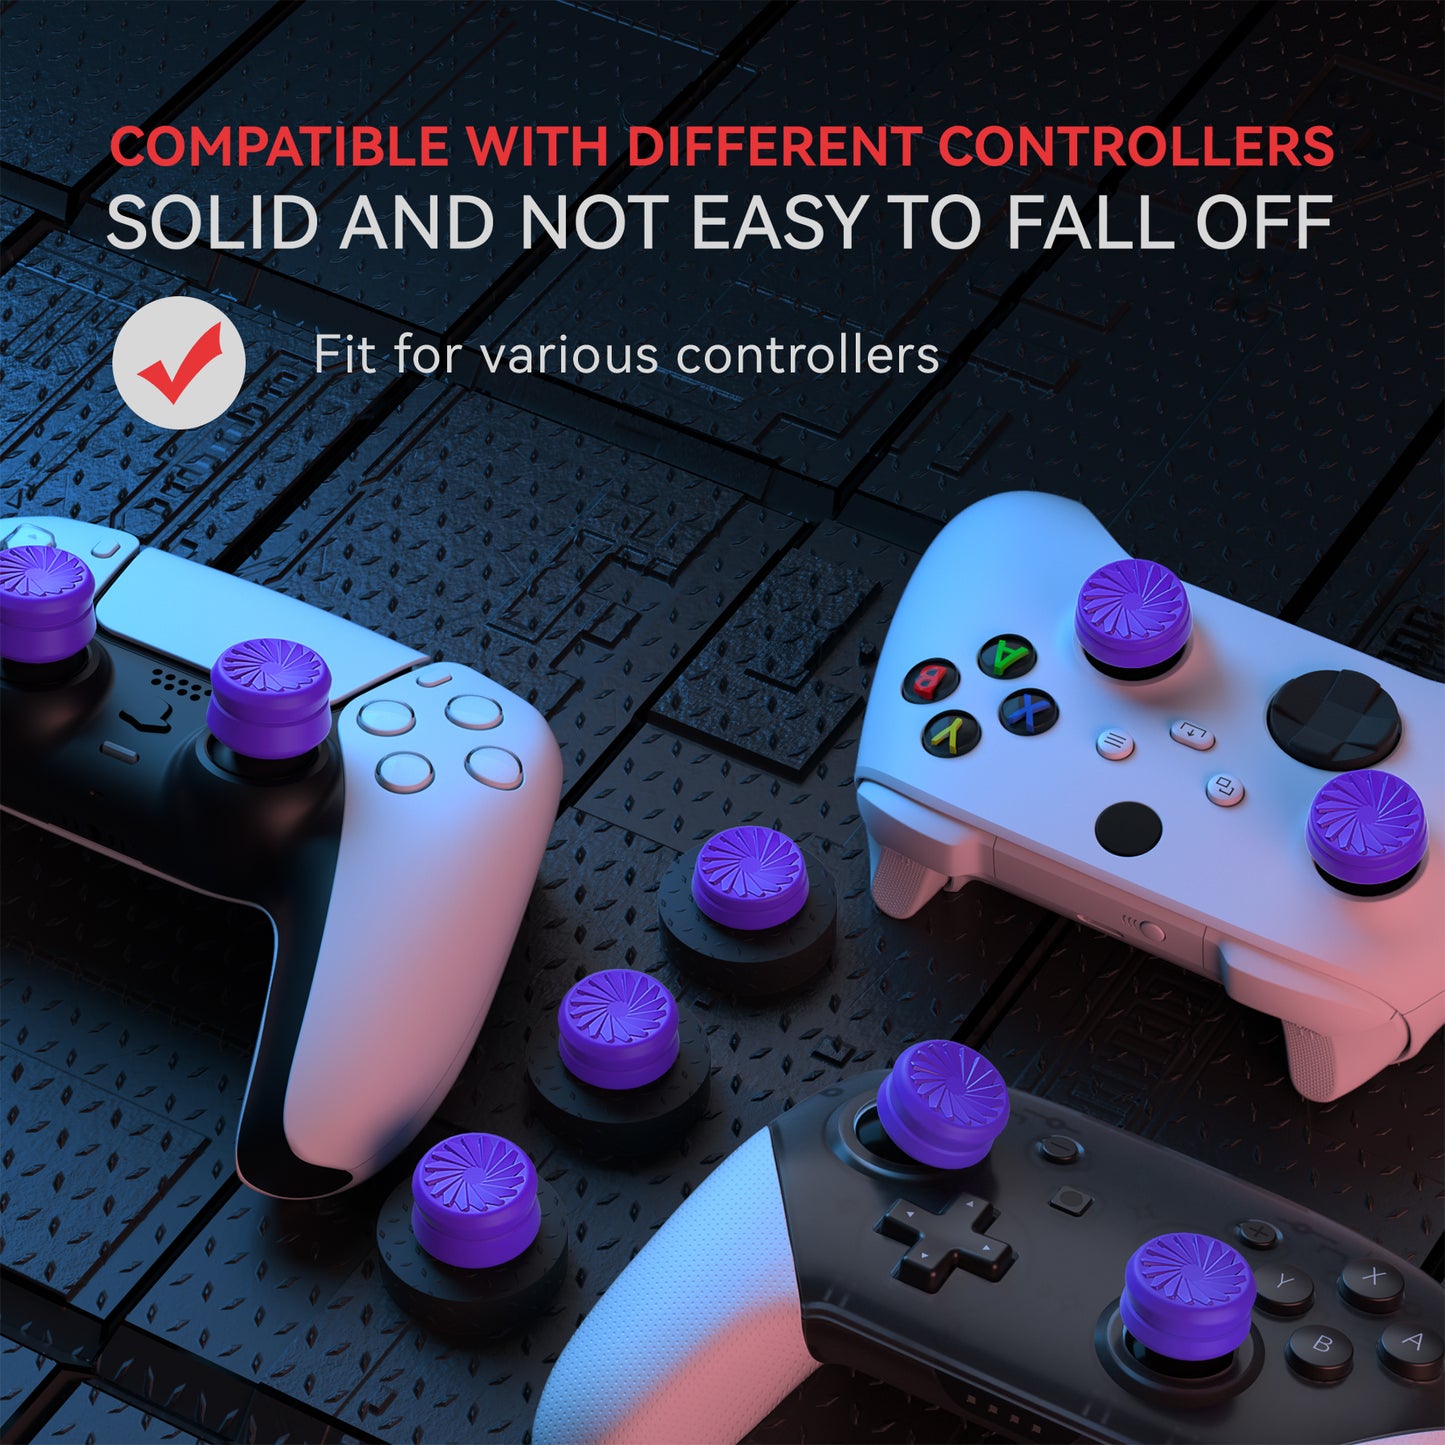 PlayVital 3 Height Turbine Thumbs Cushion Caps Thumb Grips for ps5, for ps4, Thumbstick Grip Cover for Xbox Core Wireless Controller, Thumb Grips for Xbox One, Elite Series 2, for Switch Pro - Purple - PJM3054 PlayVital